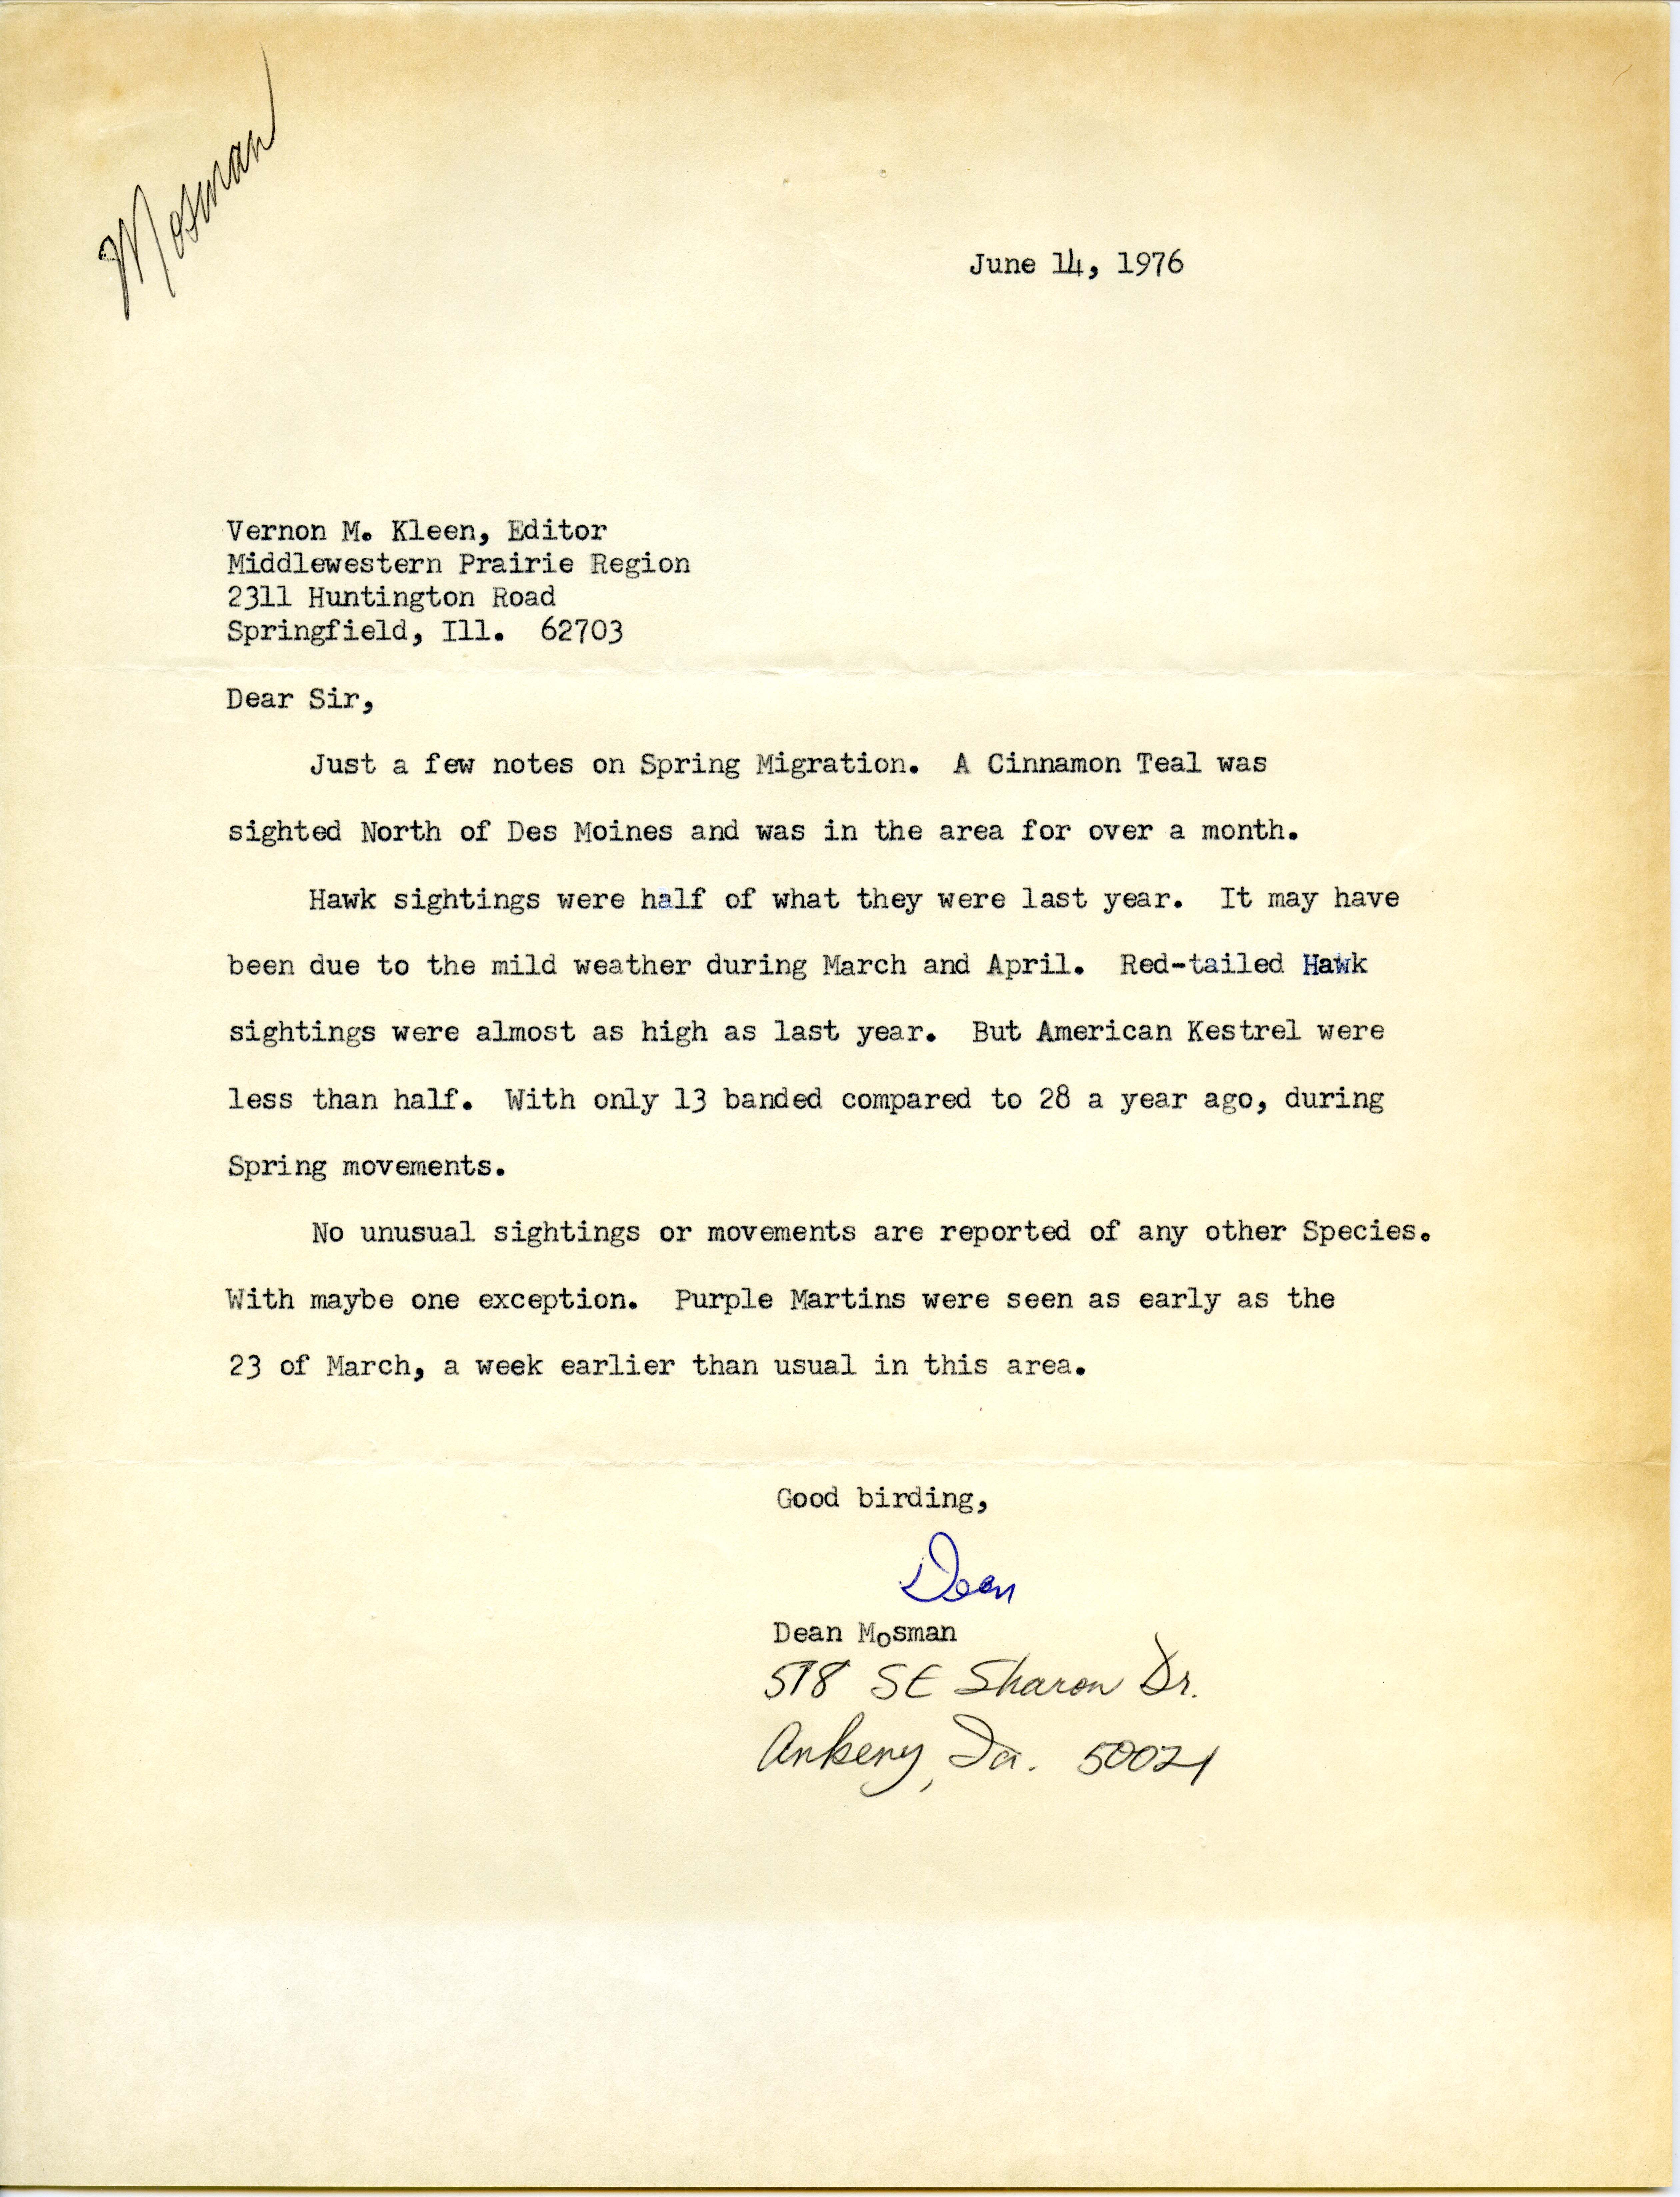 Letter from Dean Mosman to Vernon Kleen containing bird sighting notes, June 14, 1976